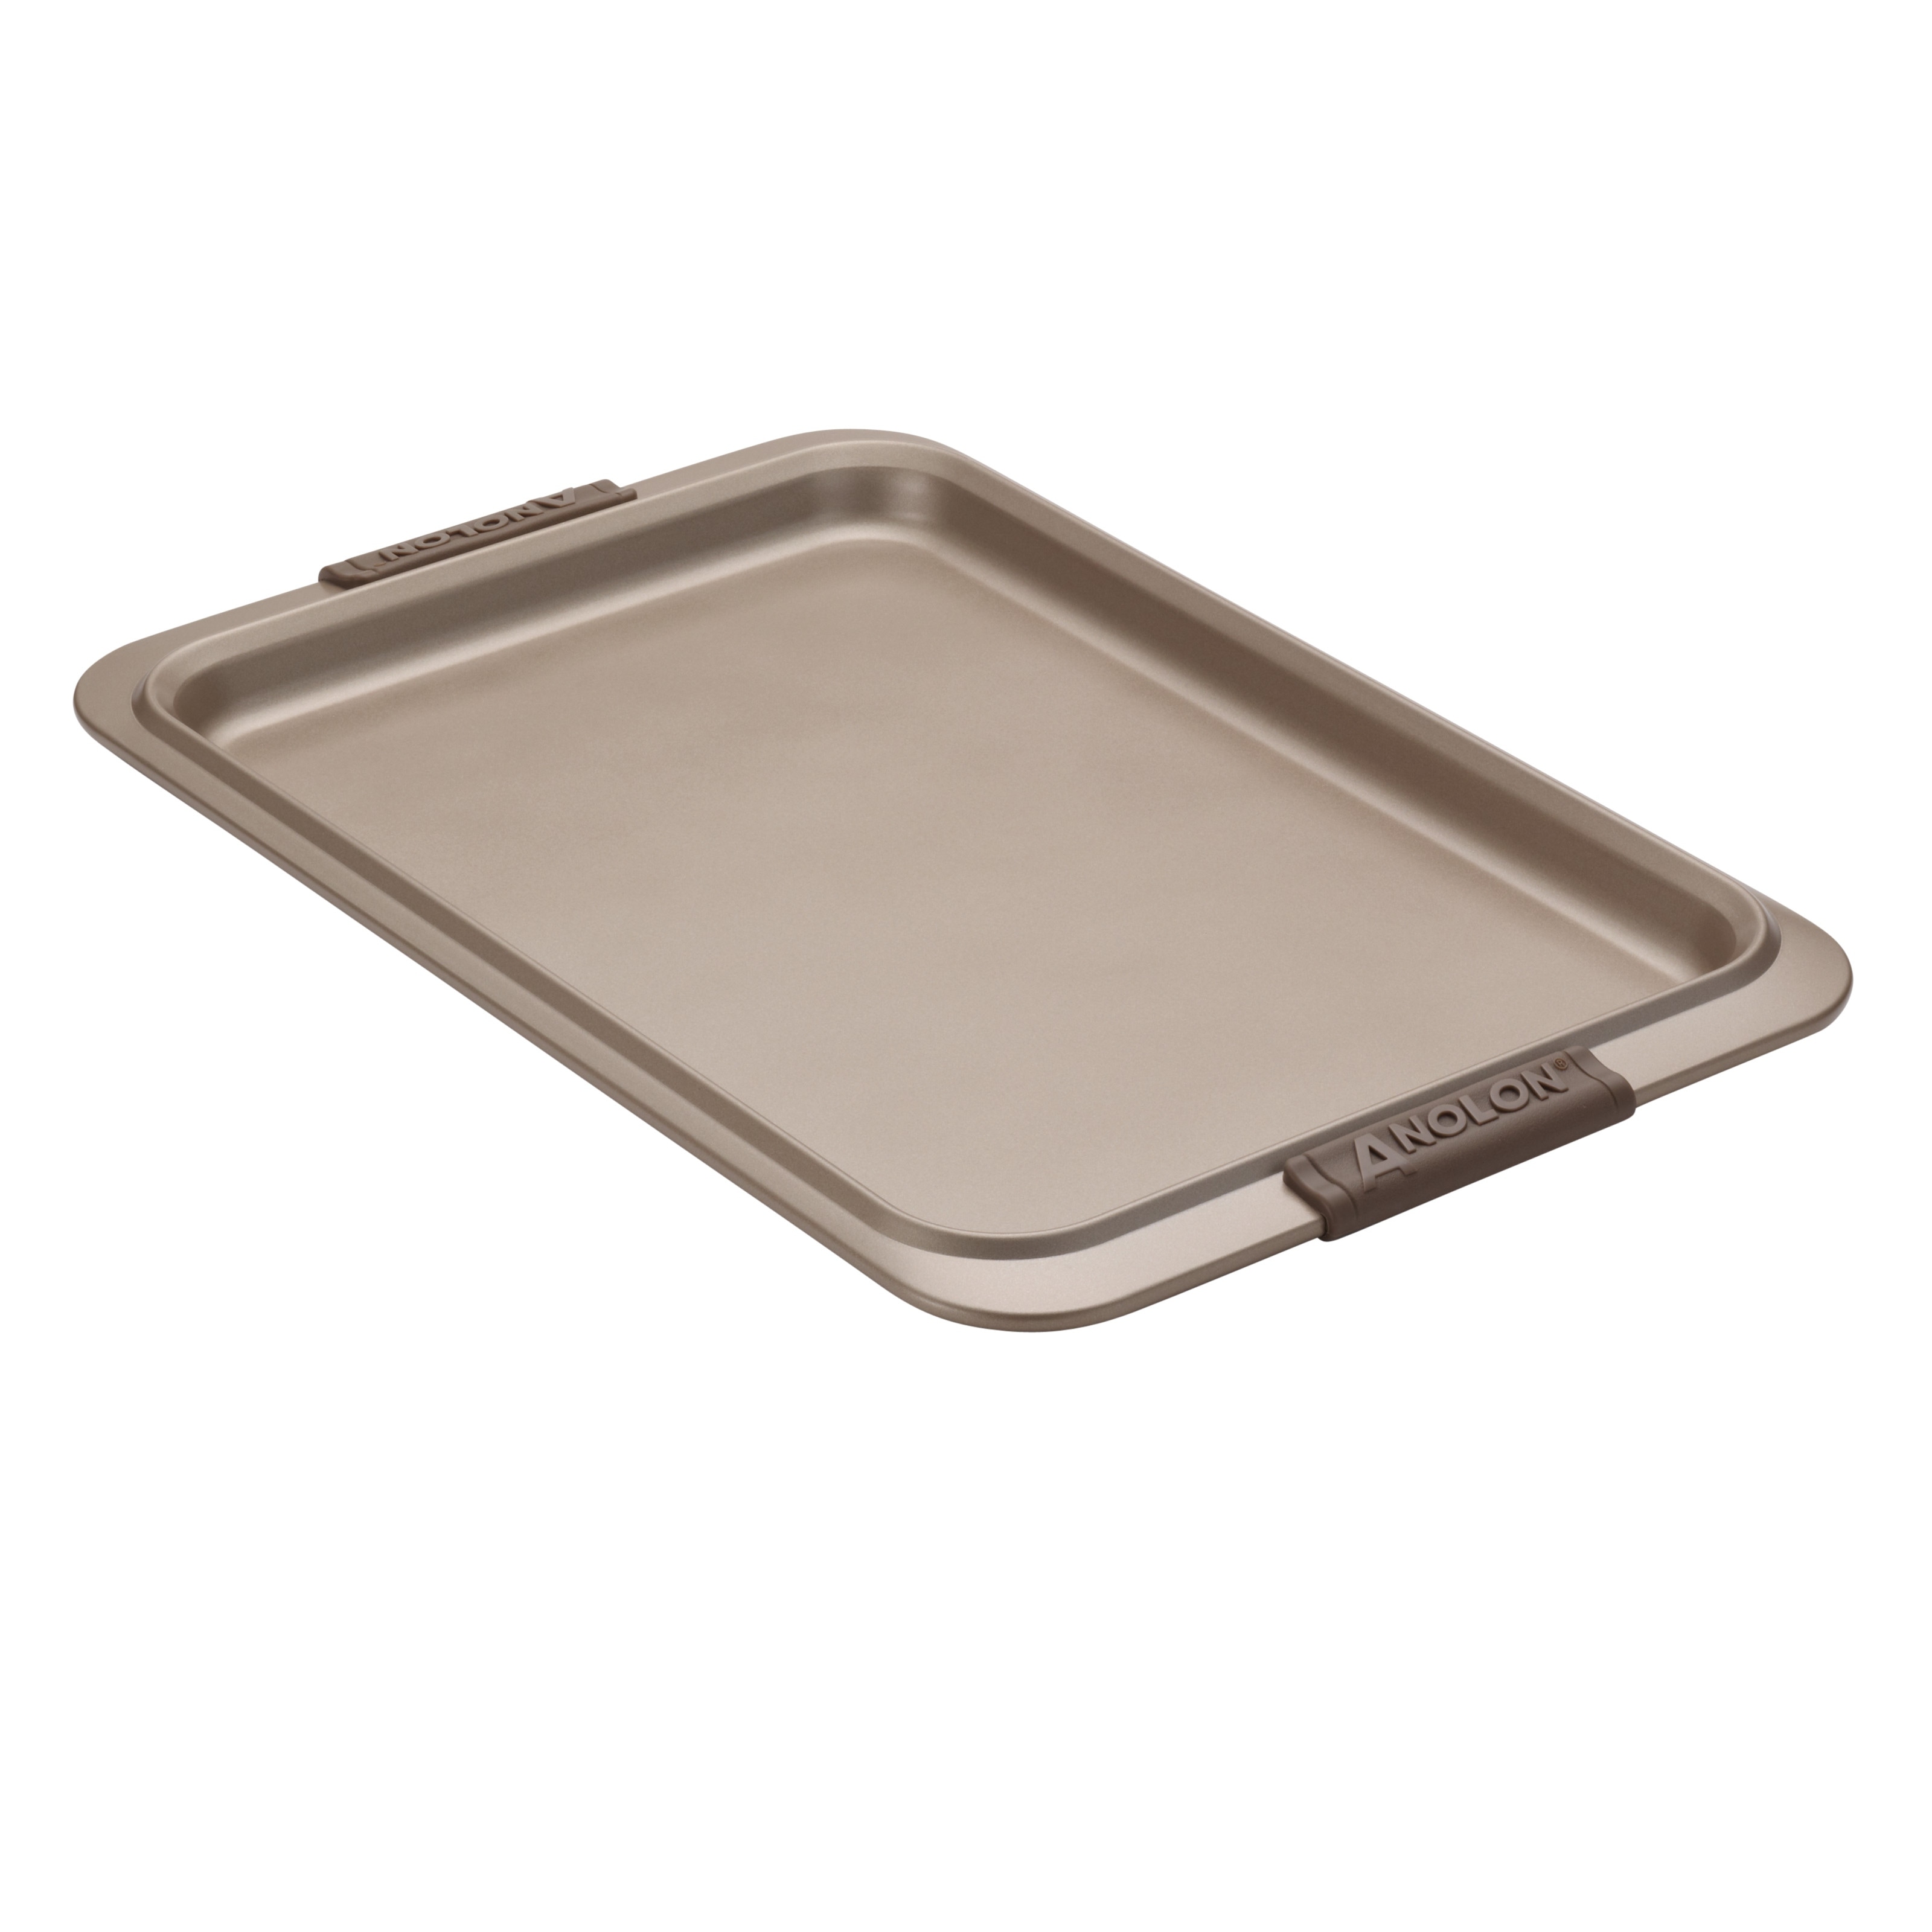 https://ak1.ostkcdn.com/images/products/is/images/direct/f0938d8455f2eeffd995875679429dfb5d007174/Anolon-Advanced-Bakeware-Nonstick-Baking-Sheet-Pan-with-Silicone-Grips%2C-10-Inch-x-15-Inch%2C-Bronze.jpg